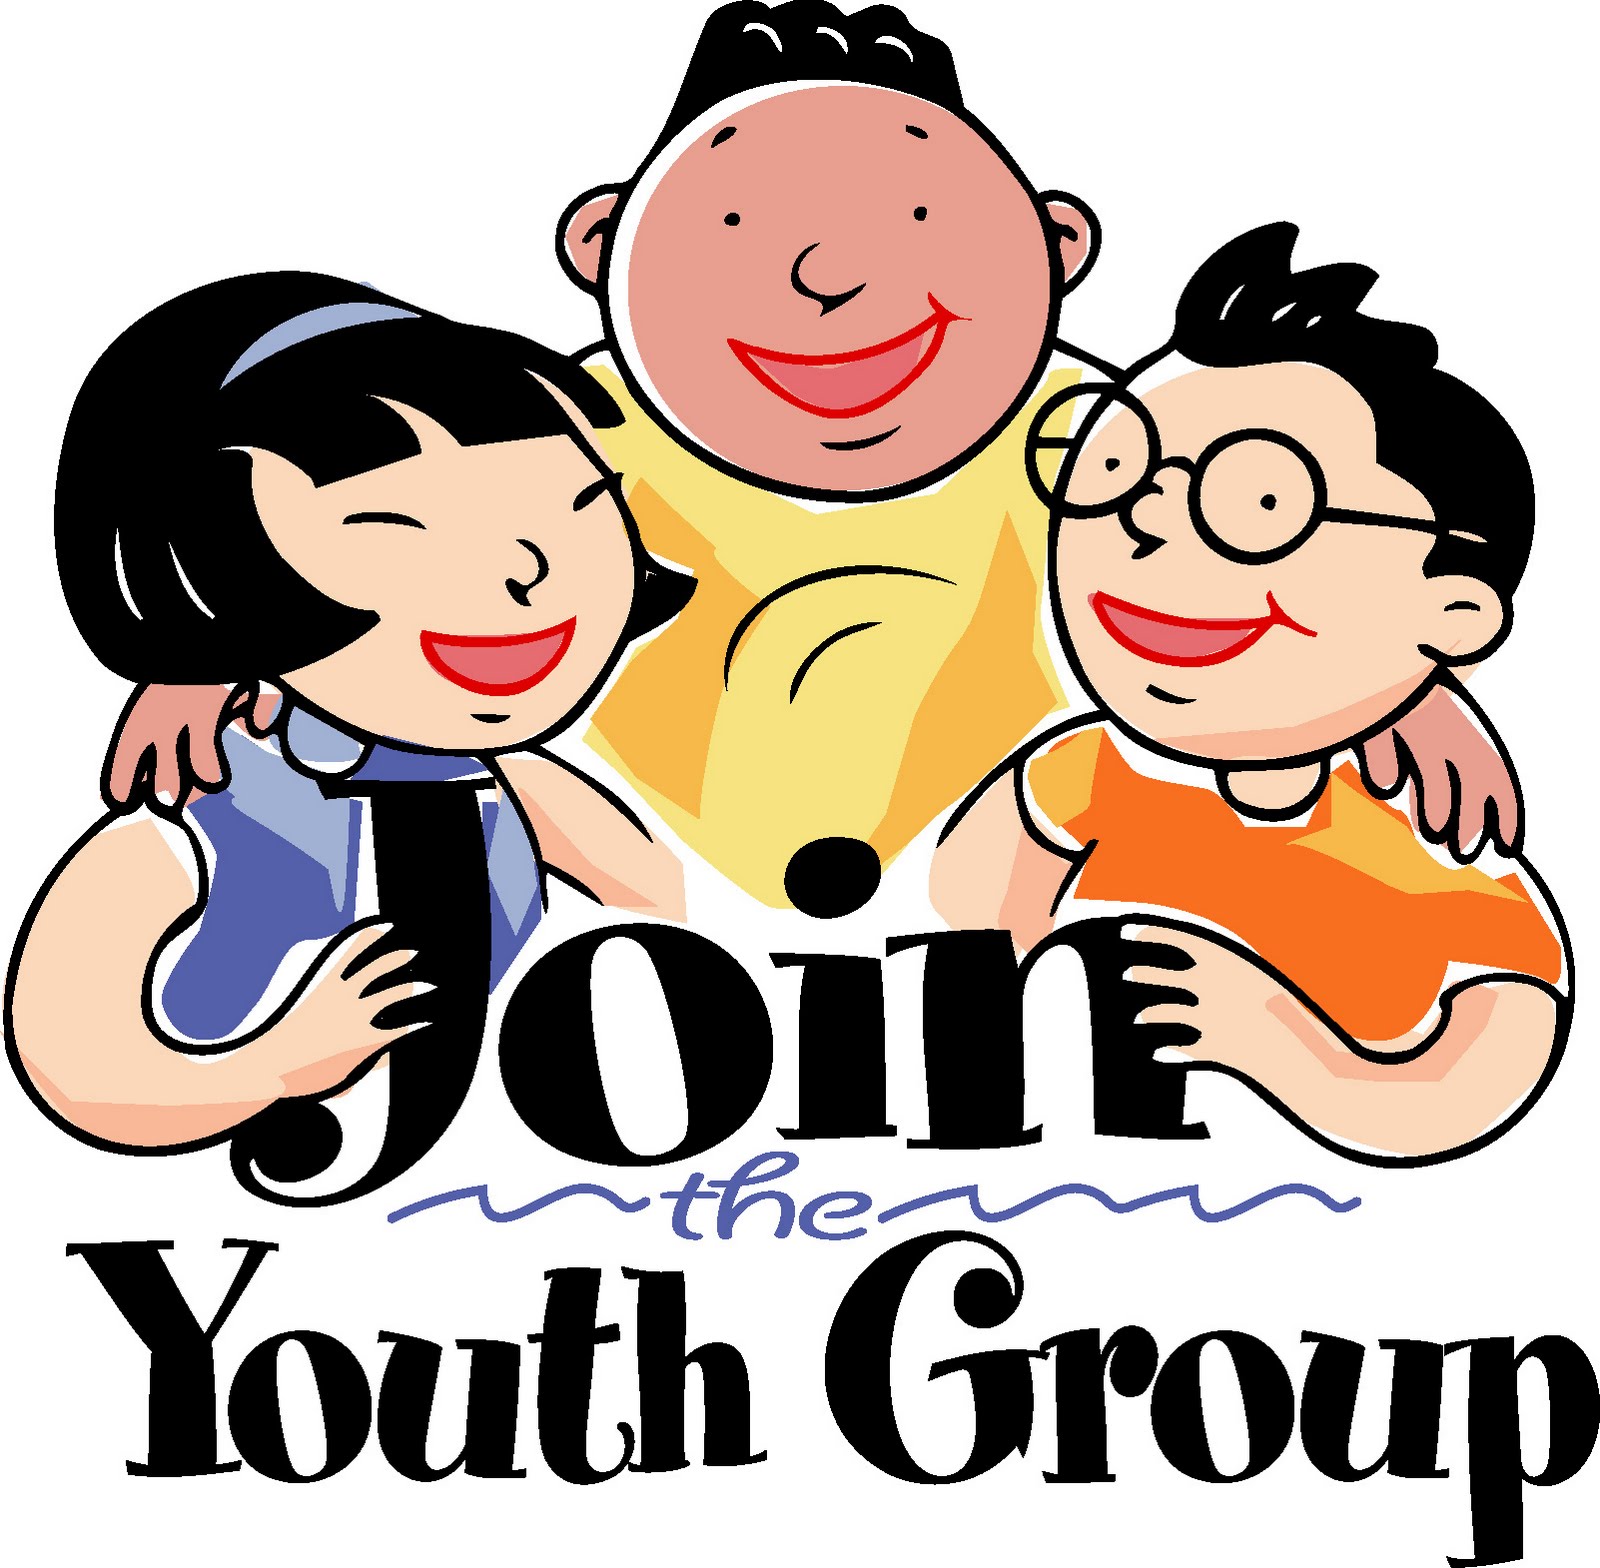 youth clipart images - photo #5